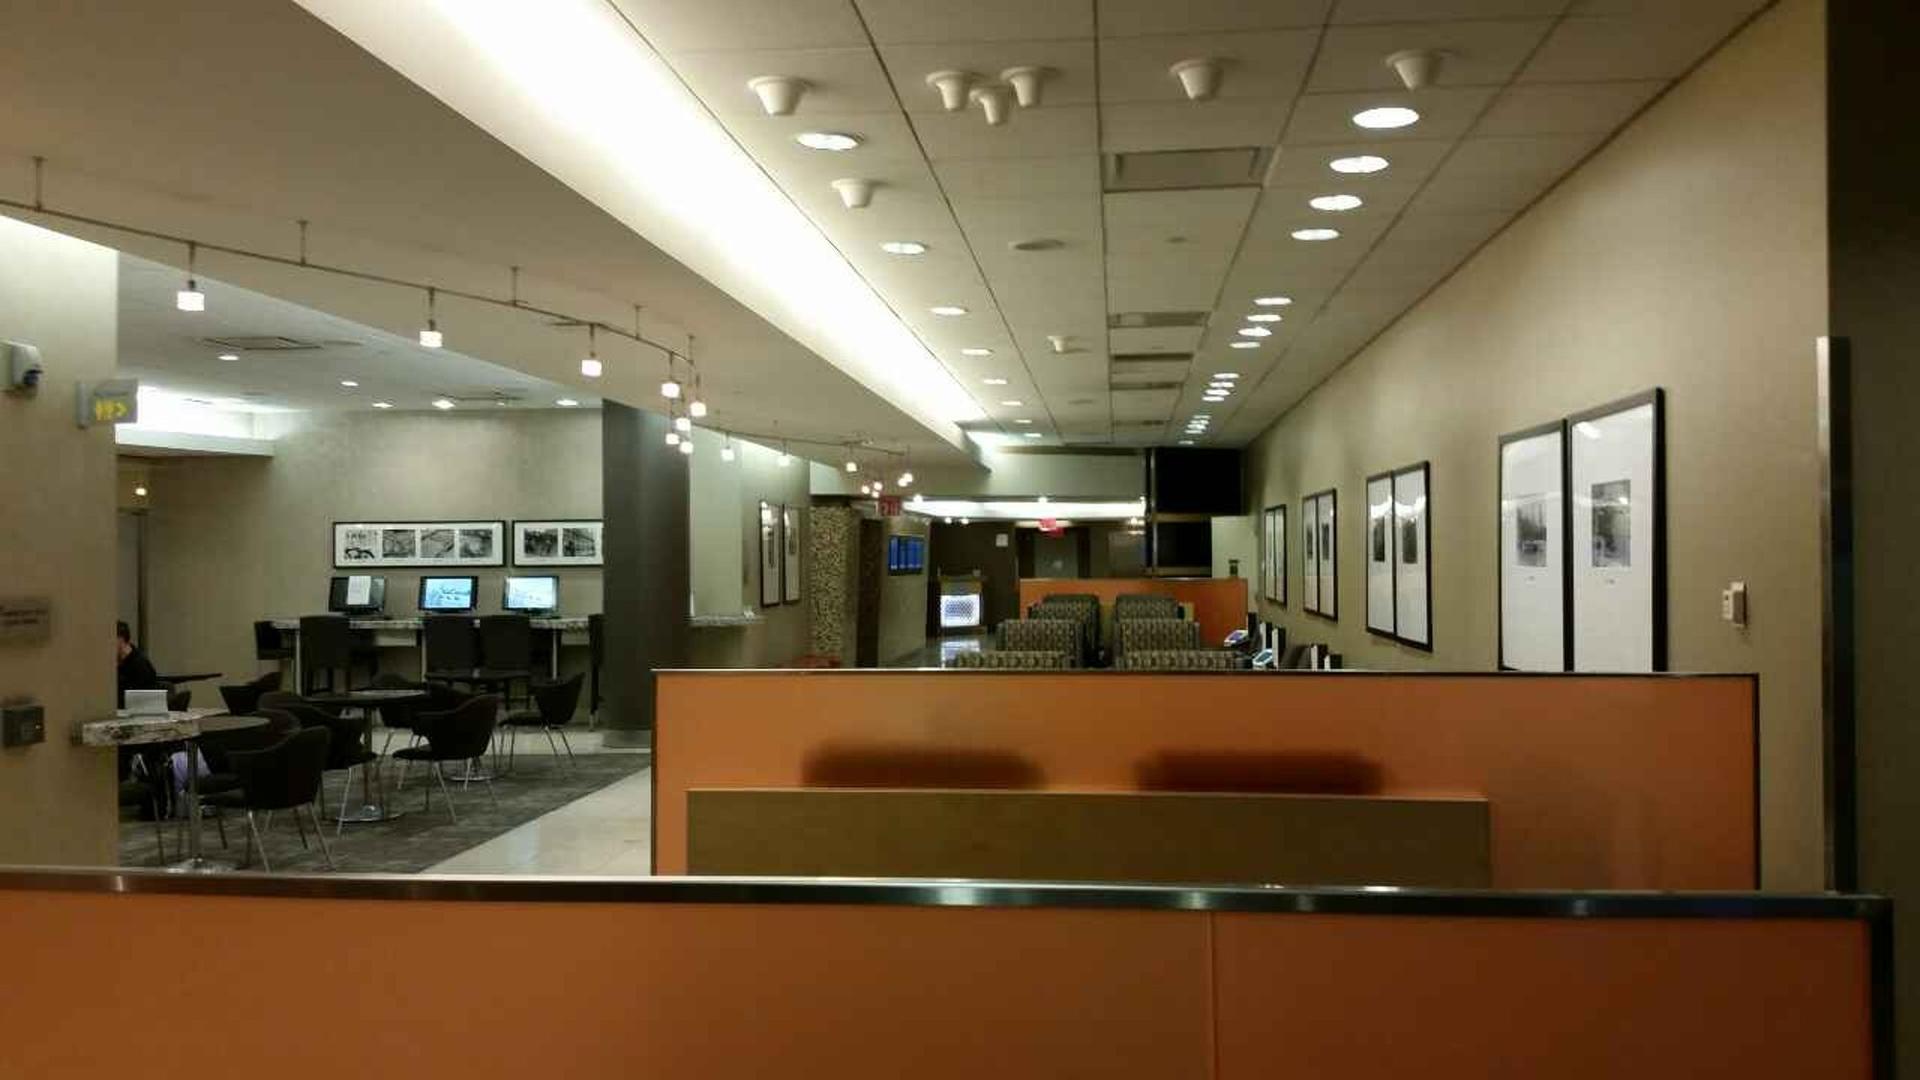 American Airlines Admirals Club image 8 of 25